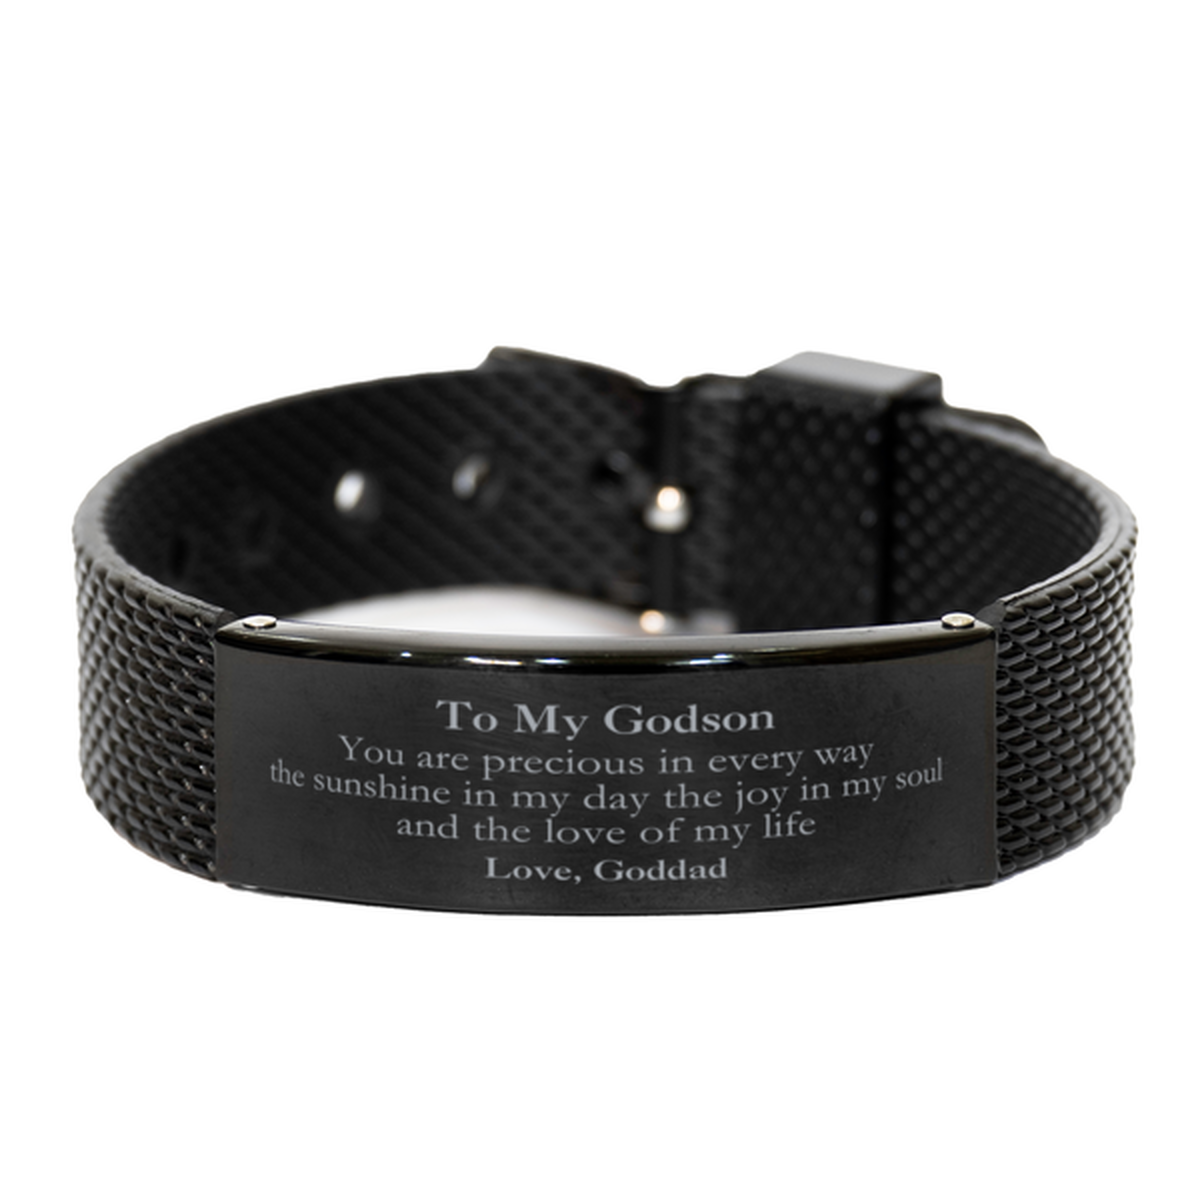 Graduation Gifts for Godson Black Shark Mesh Bracelet Present from Goddad, Christmas Godson Birthday Gifts Godson You are precious in every way the sunshine in my day. Love, Goddad